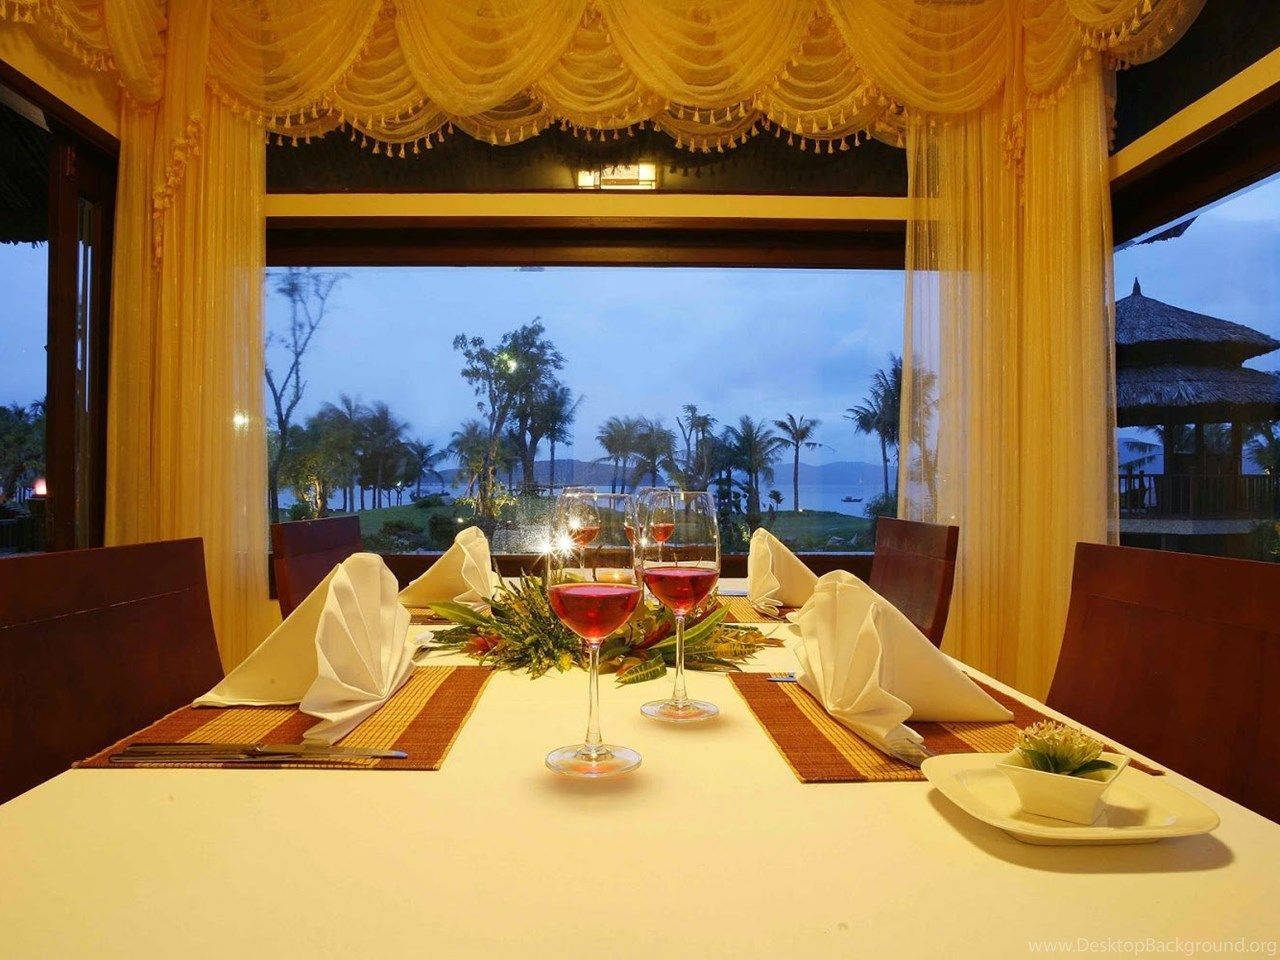 Restaurant Overlooking Coconut Trees And Mountains Wallpaper